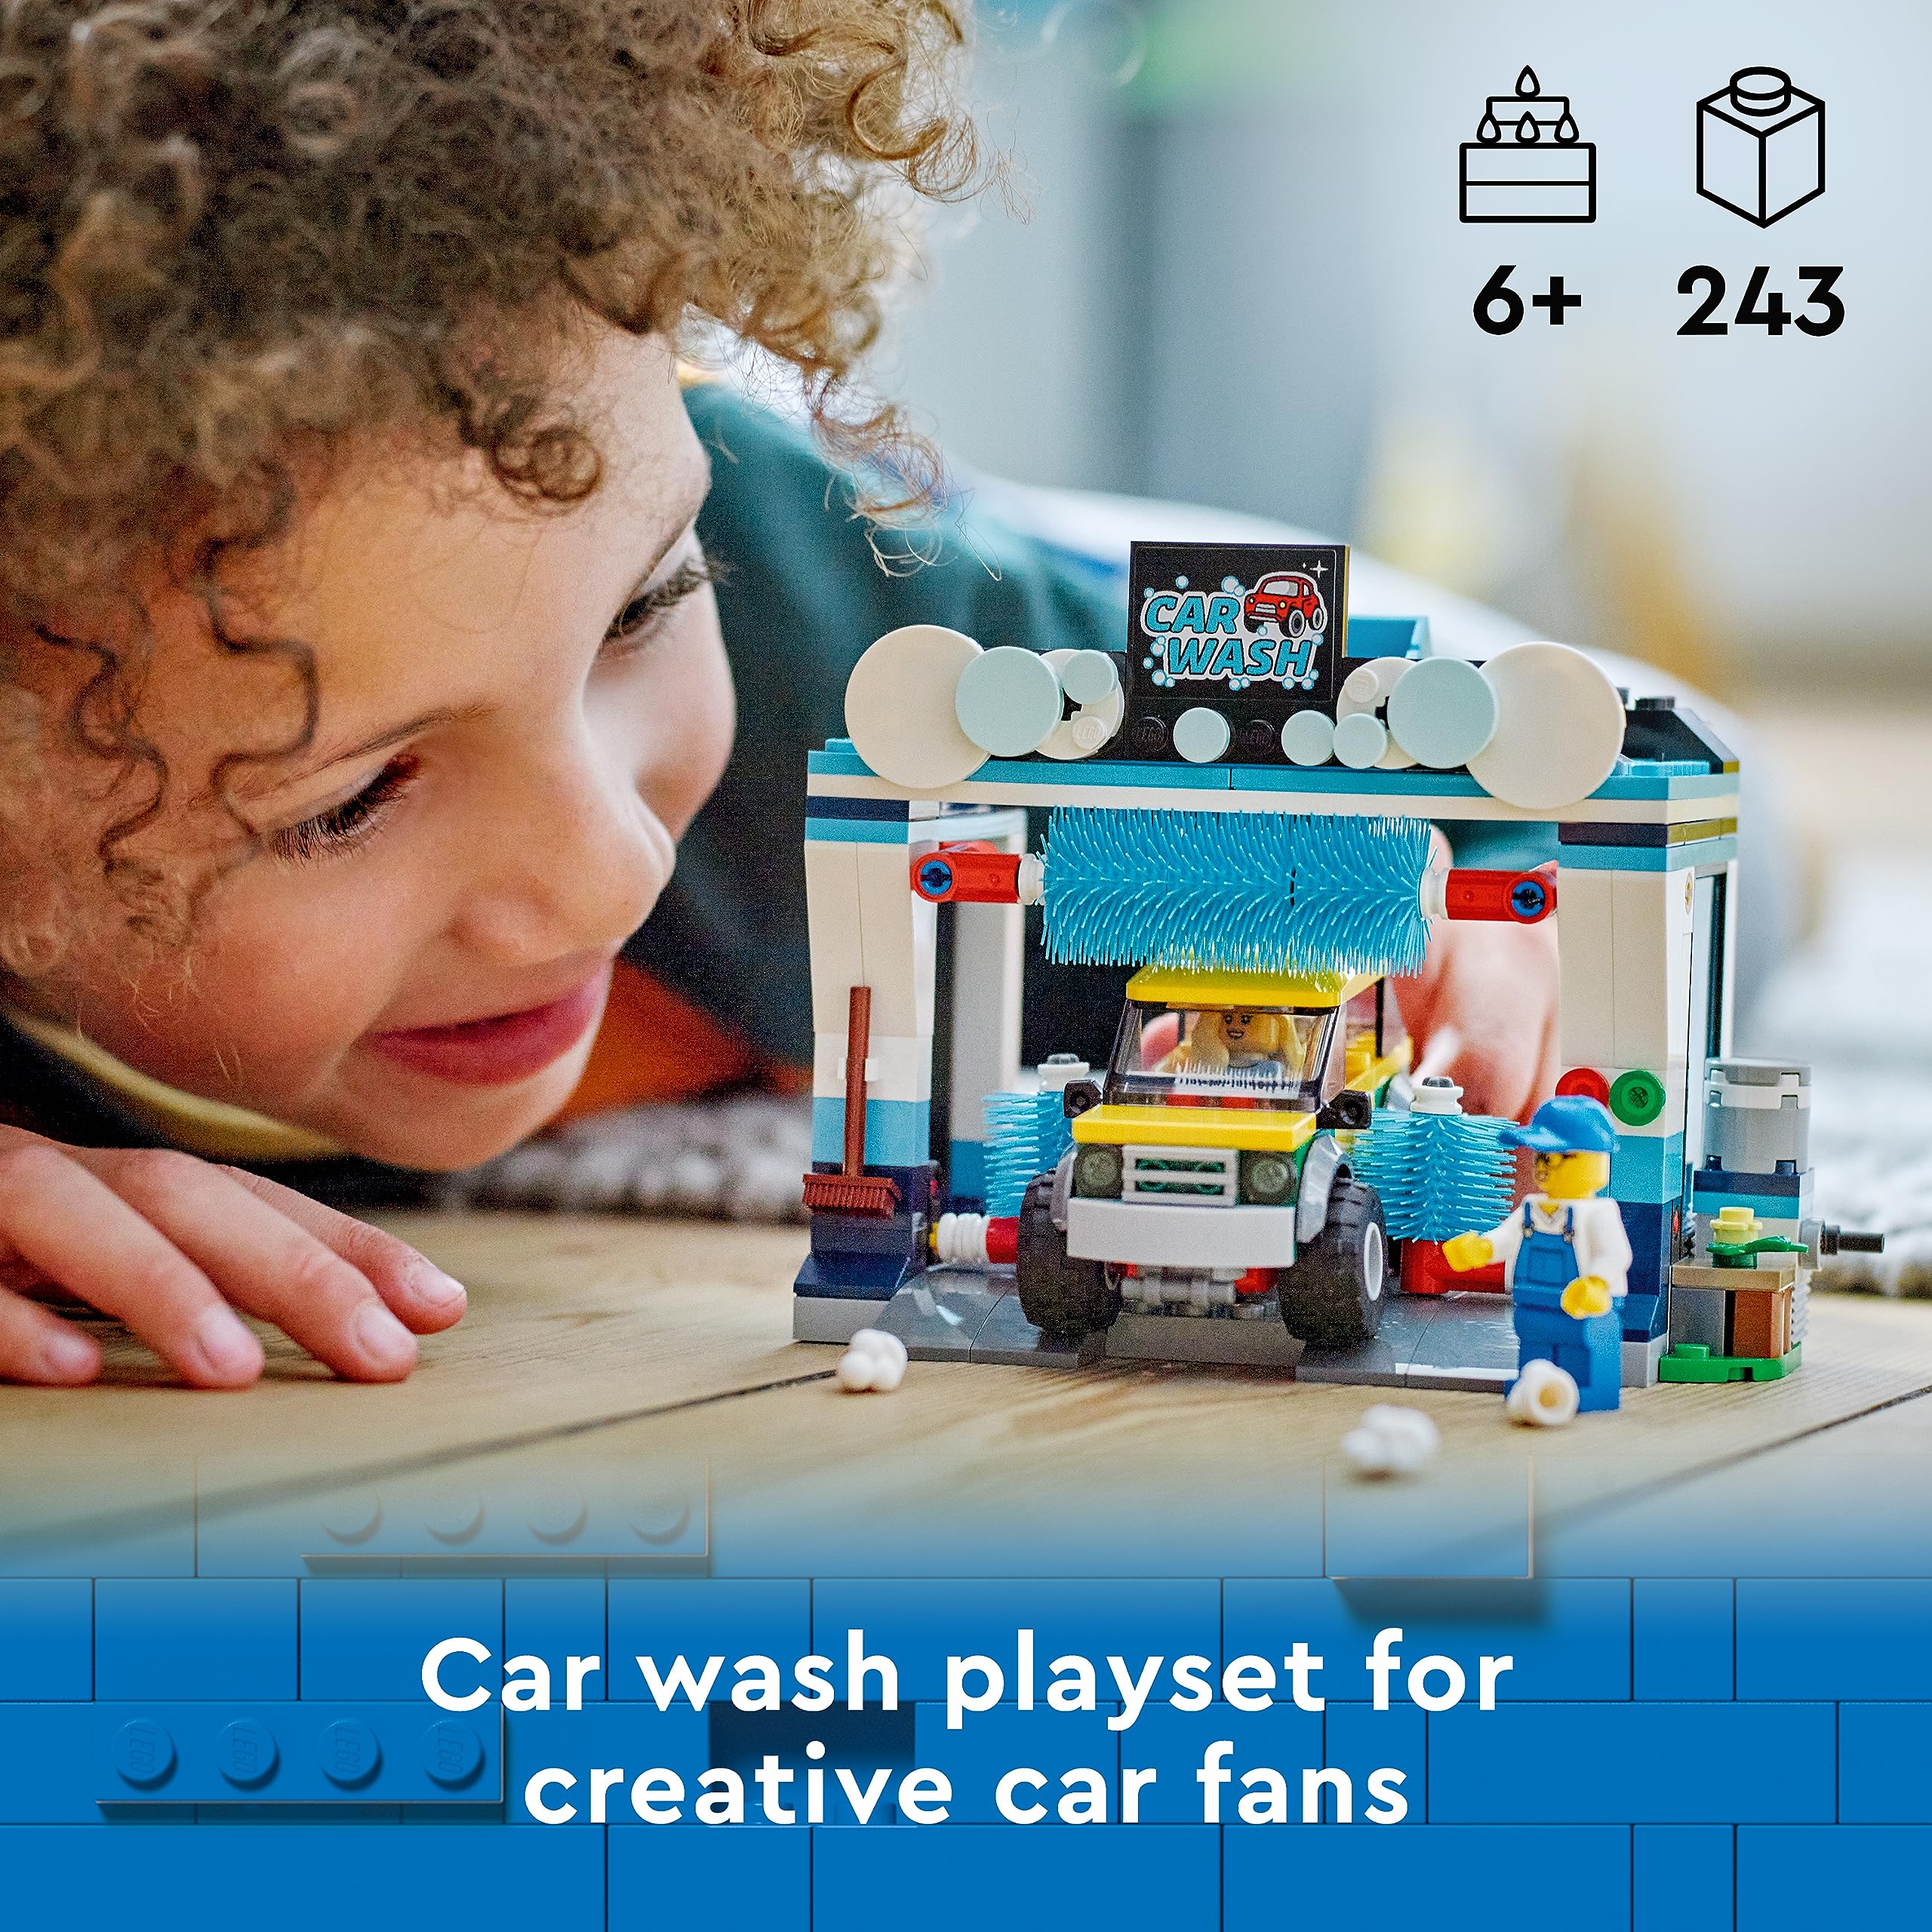 LEGO City Car Wash 60362 Building Toy Set, Fun Gift Idea for Kids Ages 6+, Features Spinnable Washer Brushes and Includes an Automobile and 2 Minifigures